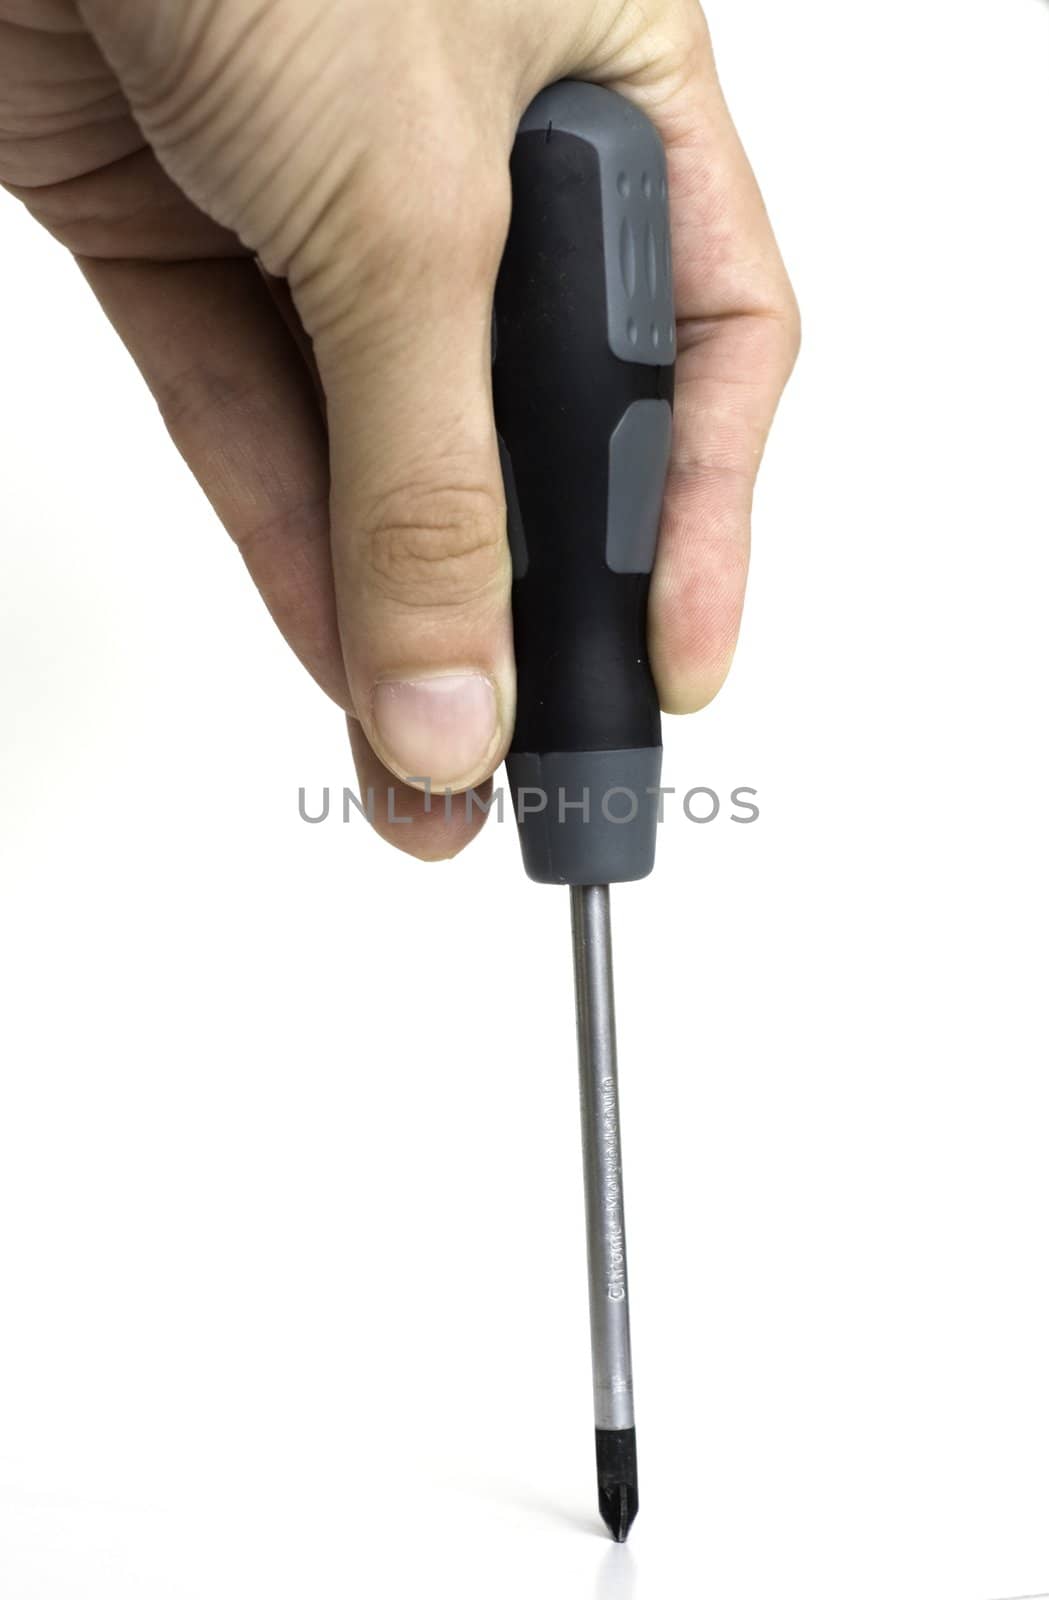 Convenient strong screw-driver for any repair by mafffutochka